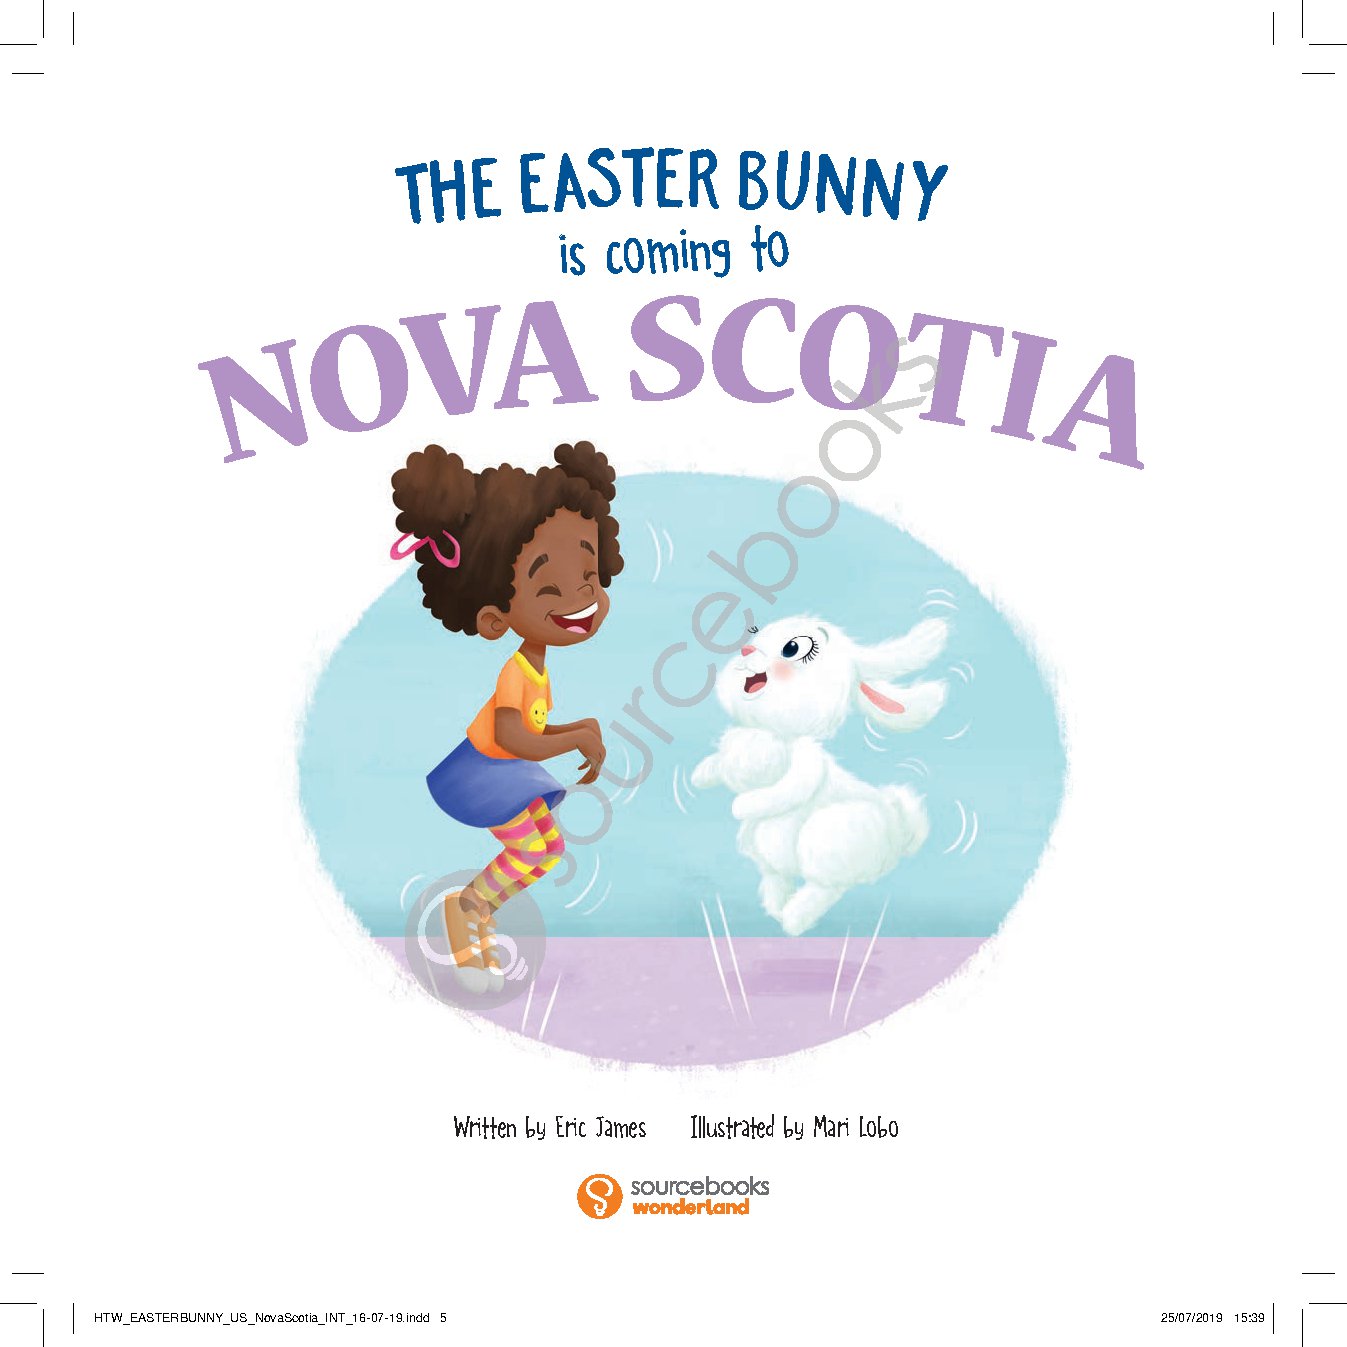 The Easter Bunny Is Coming to Nova Scotia